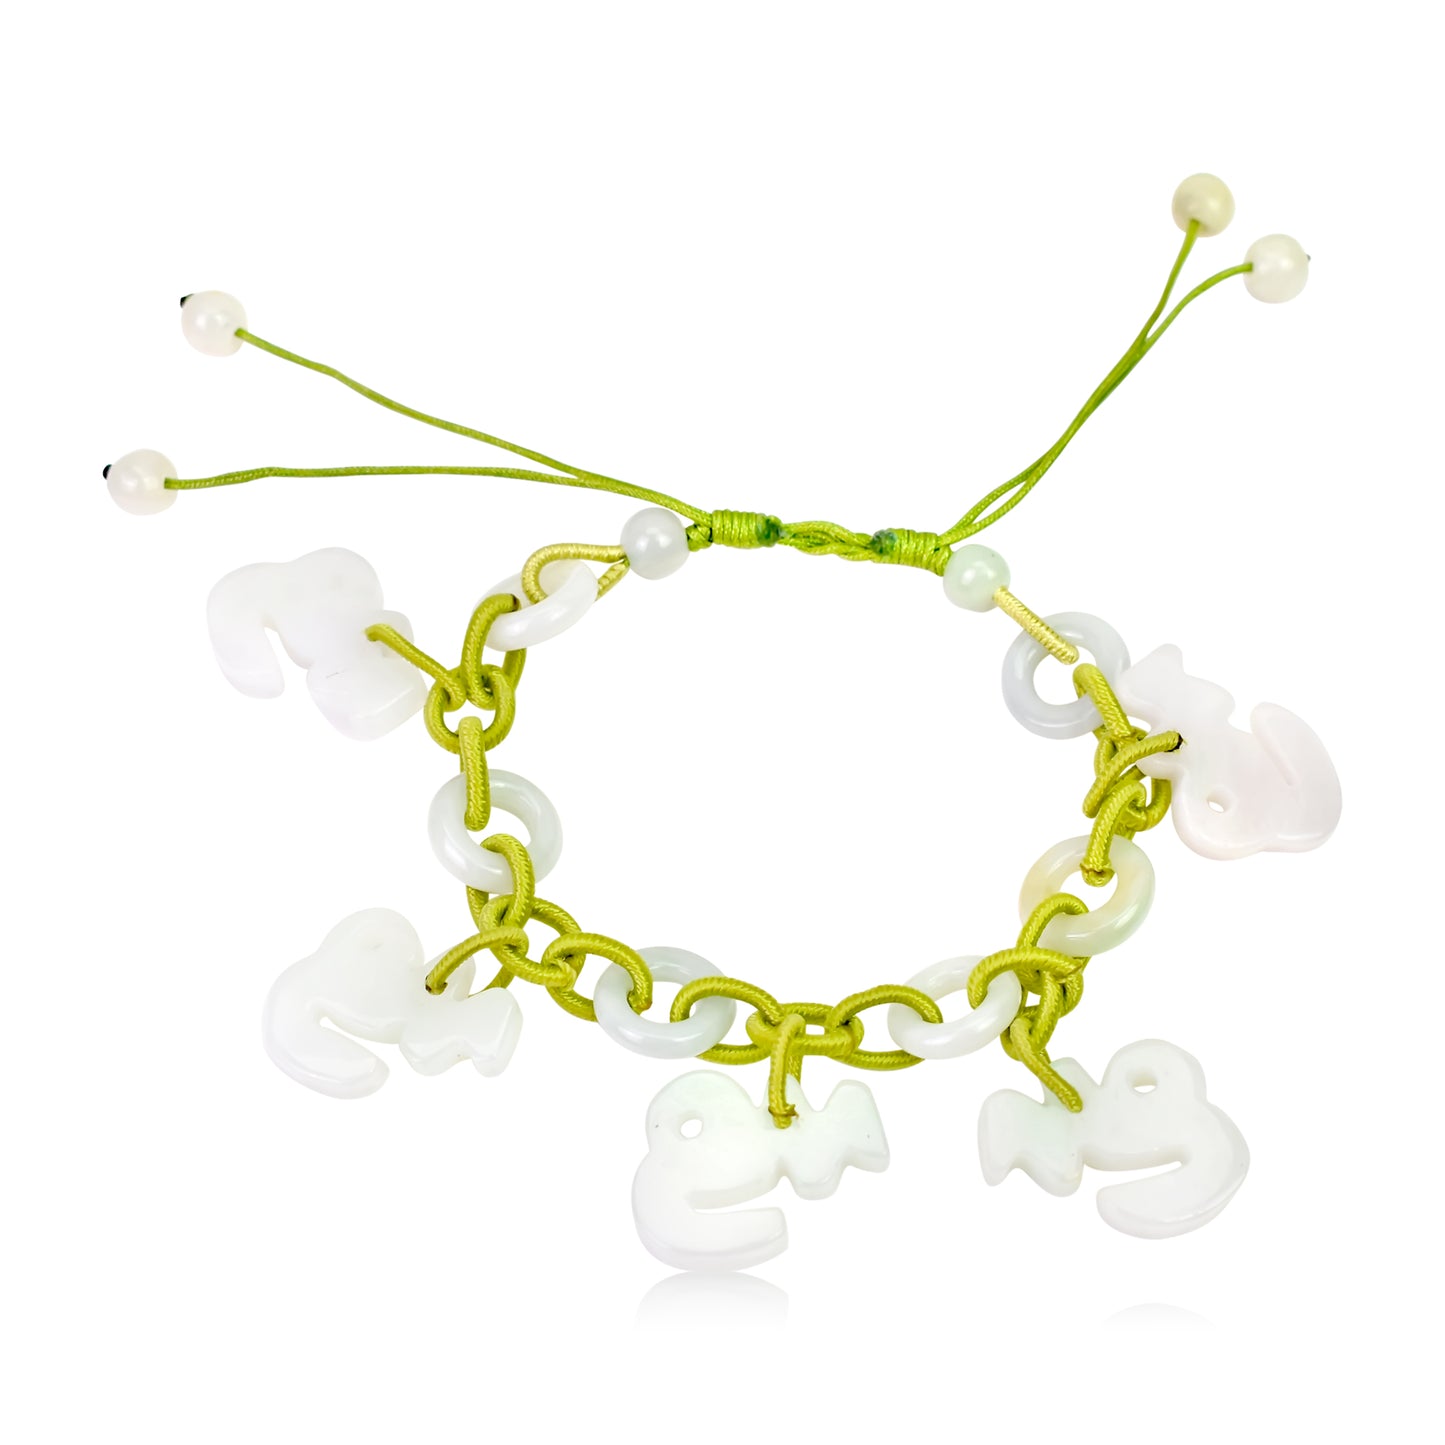 Honor the Capricorn Zodiac with Handmade Jade Jewelry Bracelet made with Lime Cord